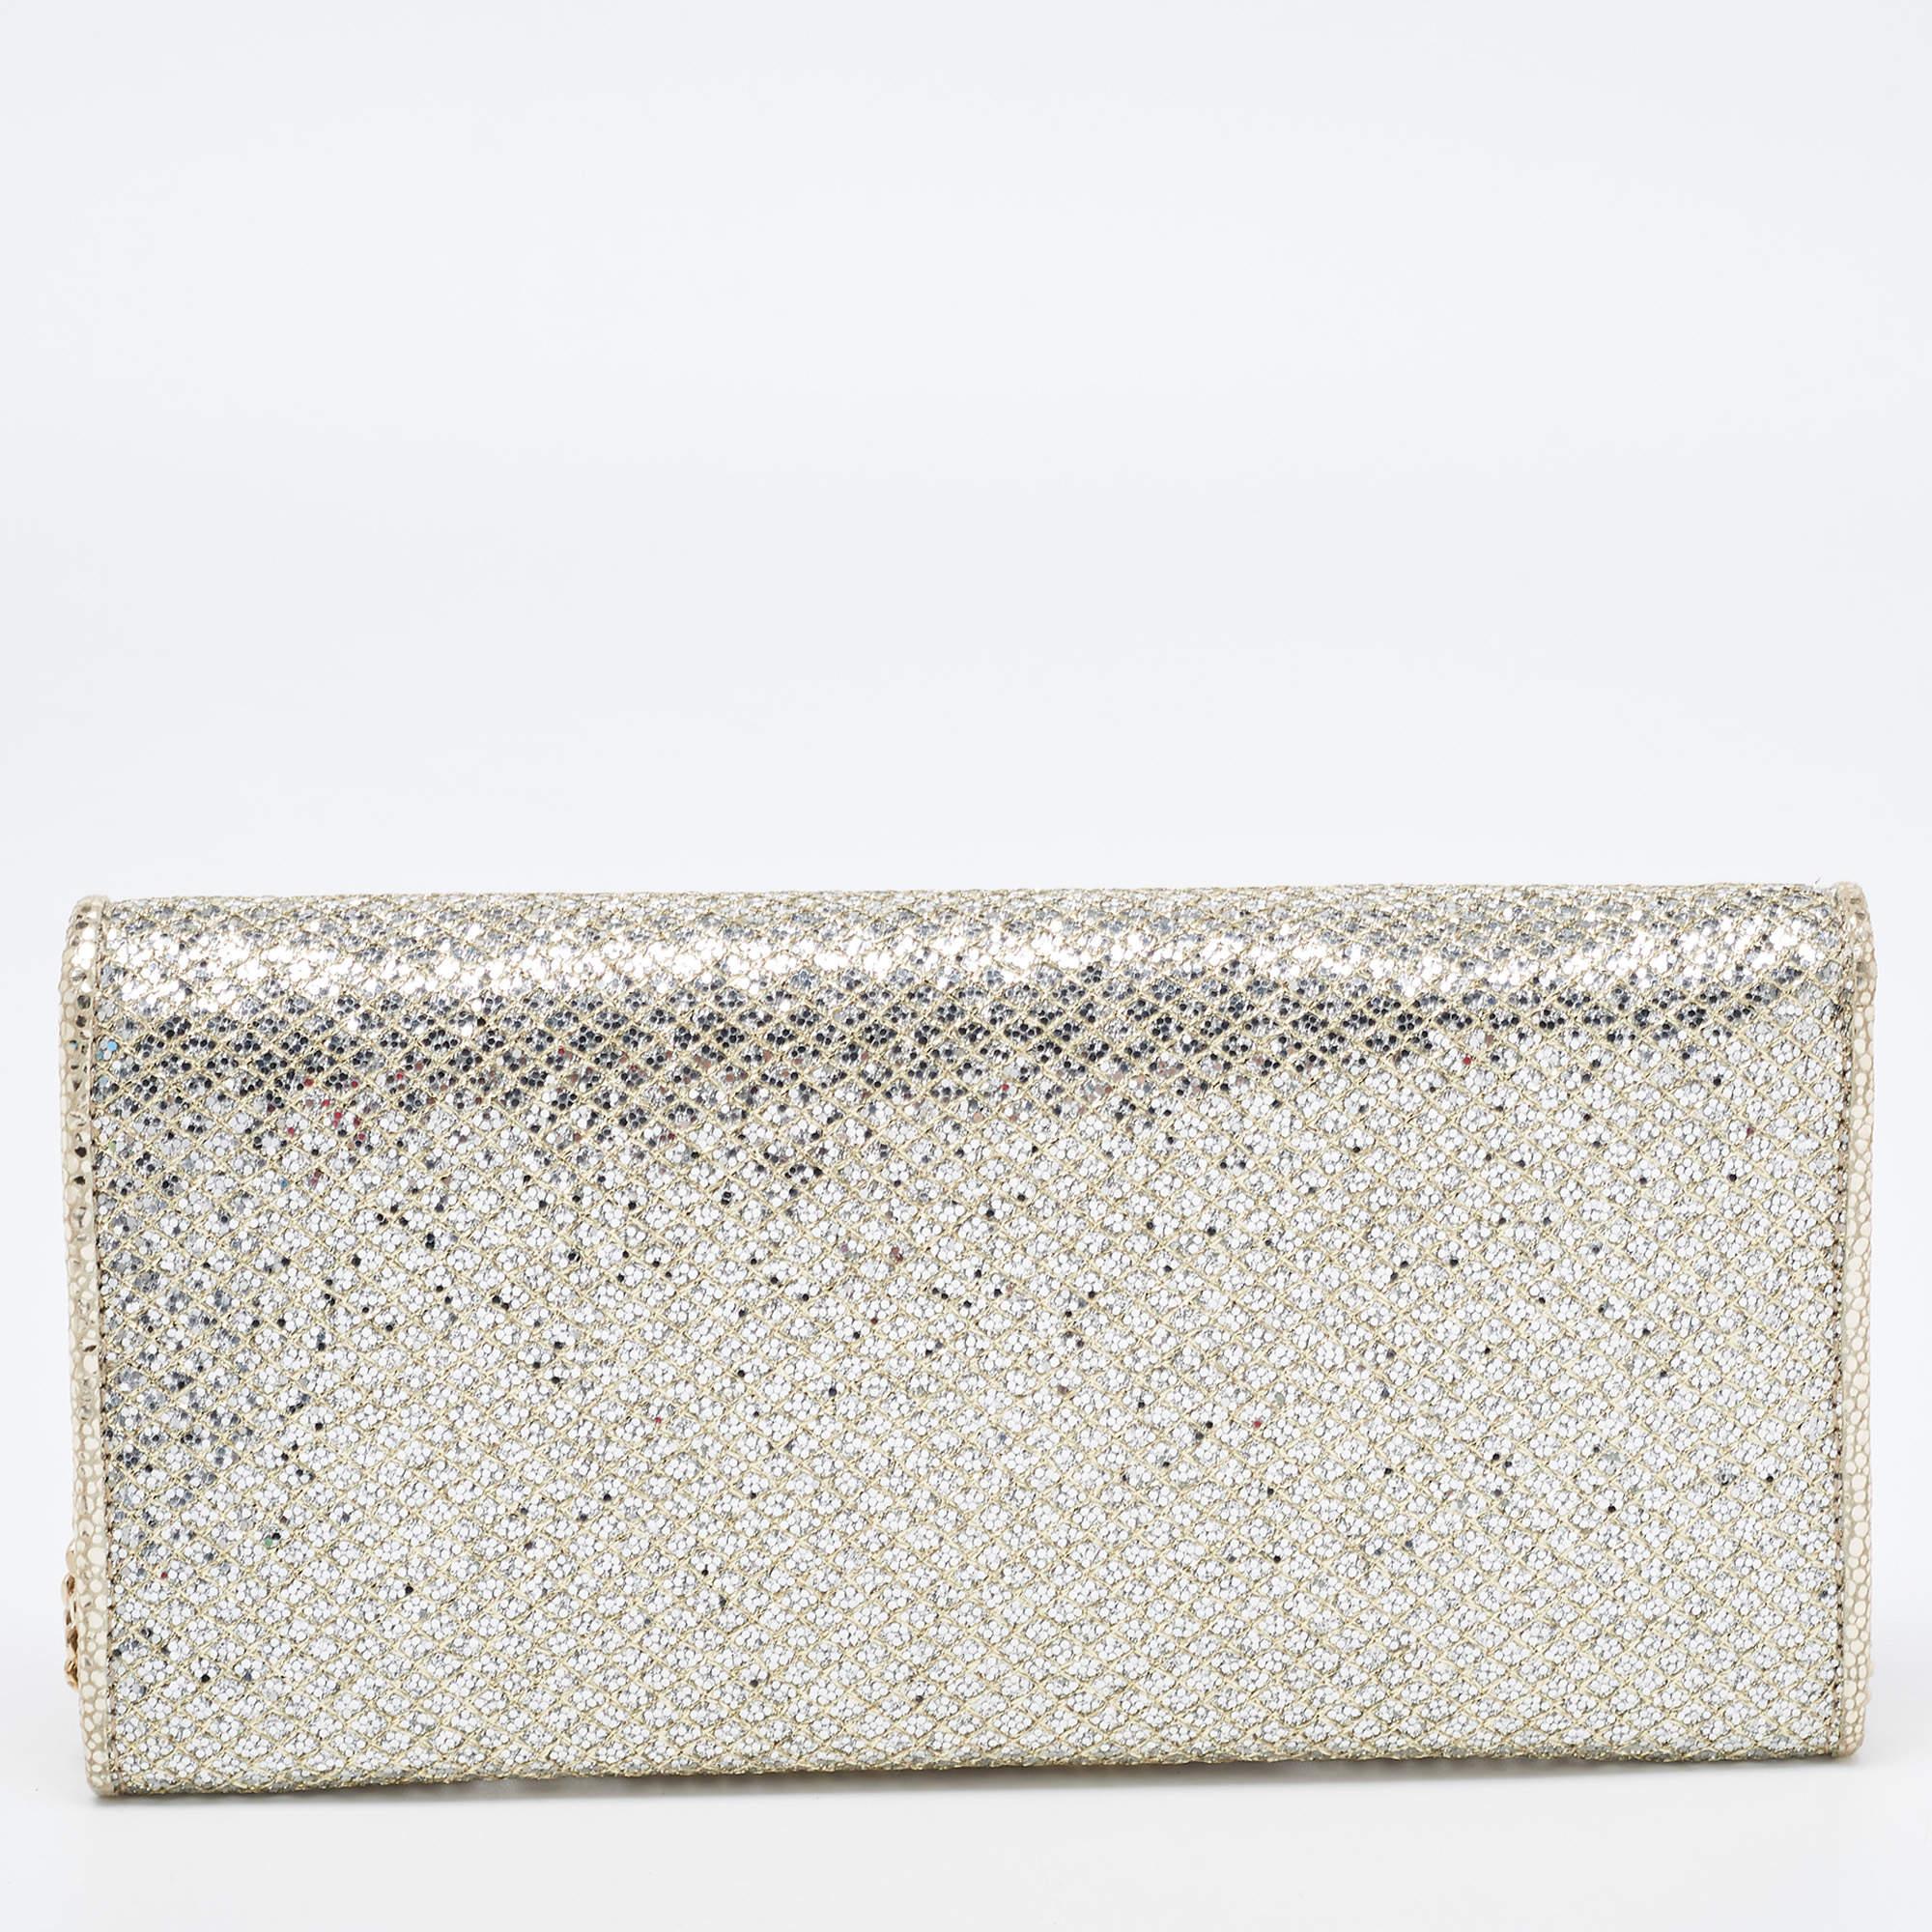 Just right for conveniently storing your valuables without weighing your look down, this Jimmy Choo clutch features a glitter fabric exterior with gold-tone metal fittings. Carry it in hand as a stylish evening accessory.

Includes: Original